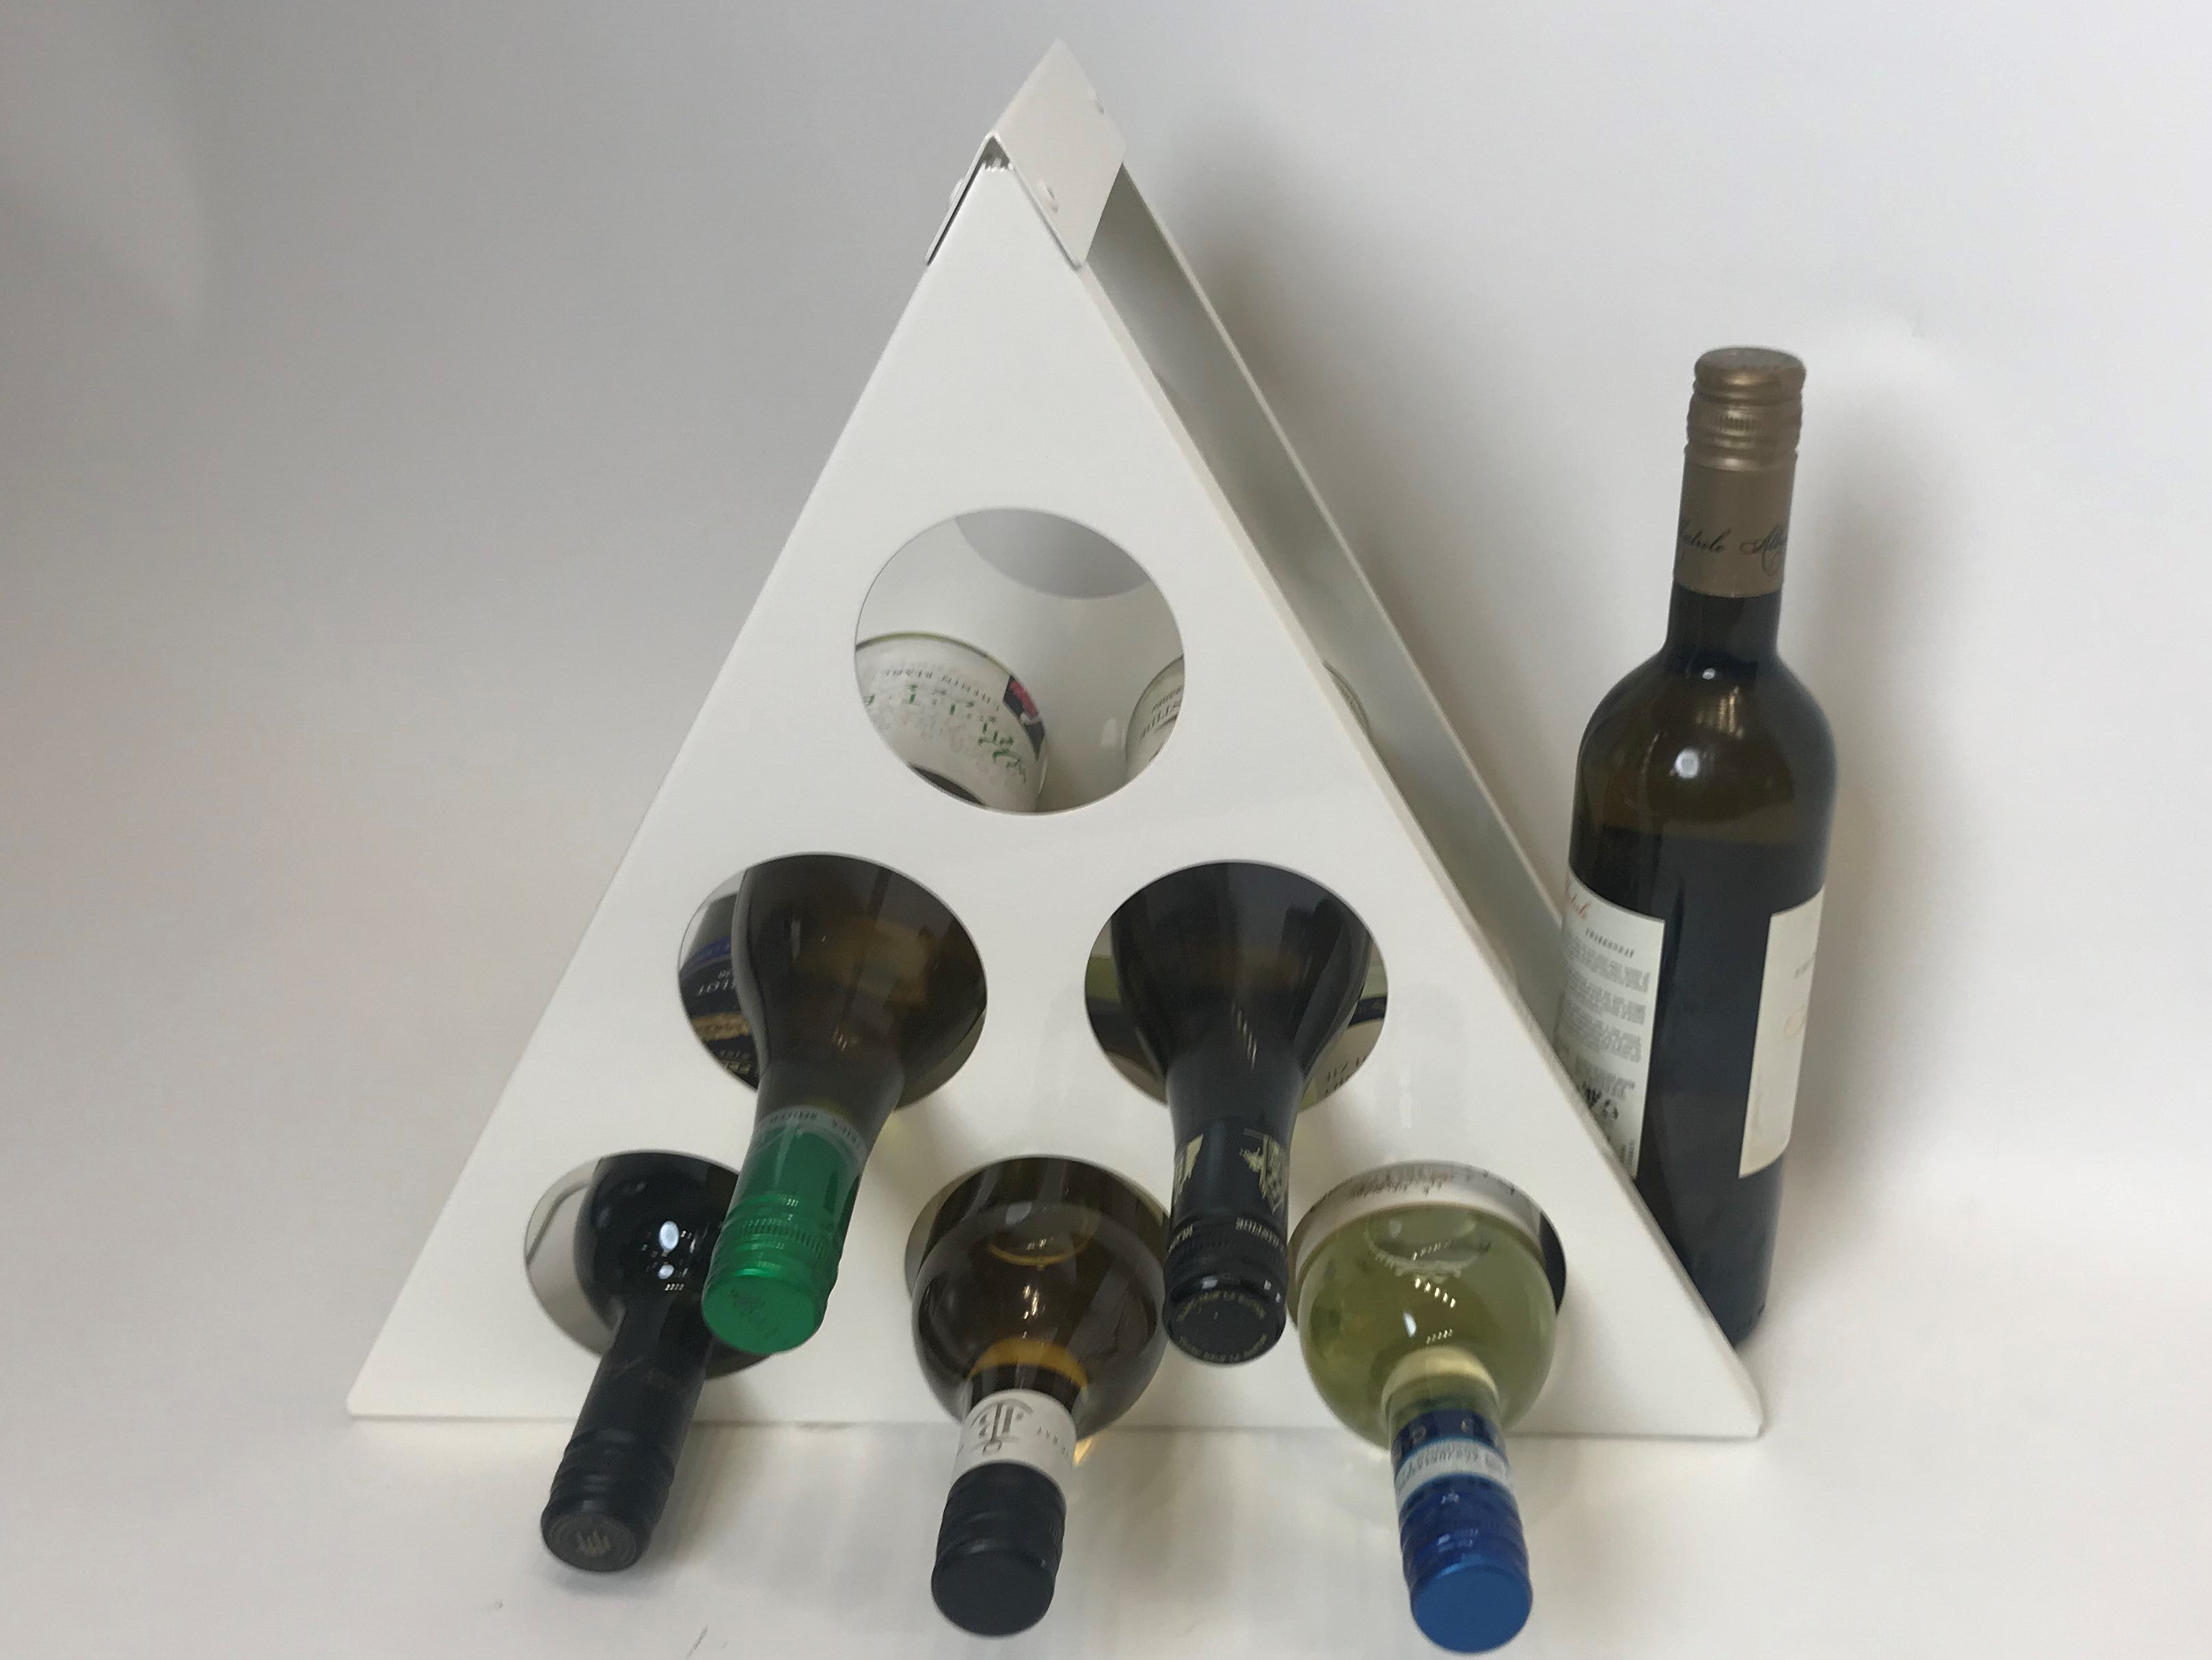 Pyramid Wine Rack with 5 Bottles of Wine in a kitchen setting with an additional bottle to the side, wide angled shot